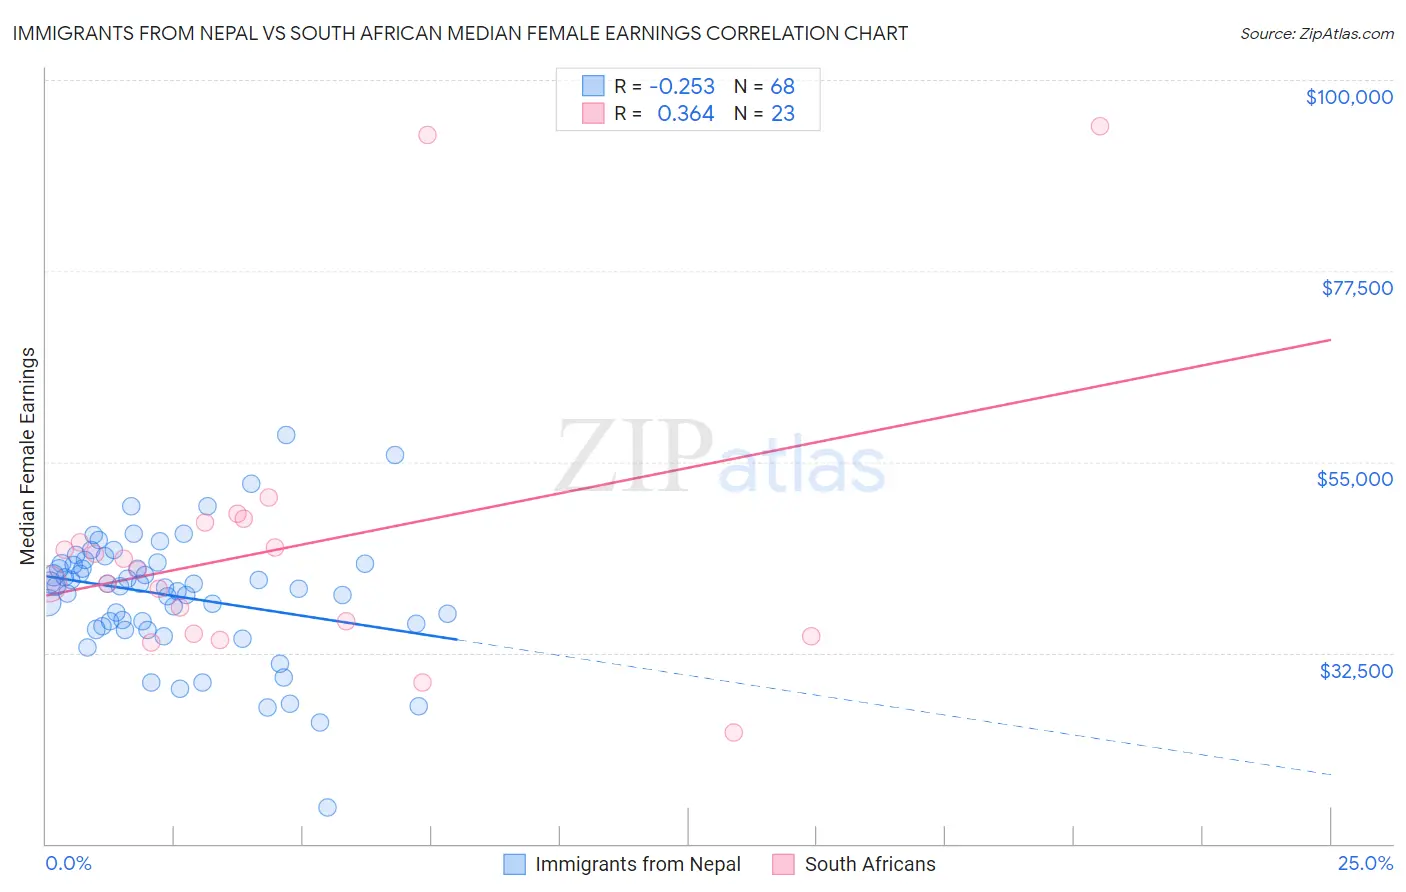 Immigrants from Nepal vs South African Median Female Earnings